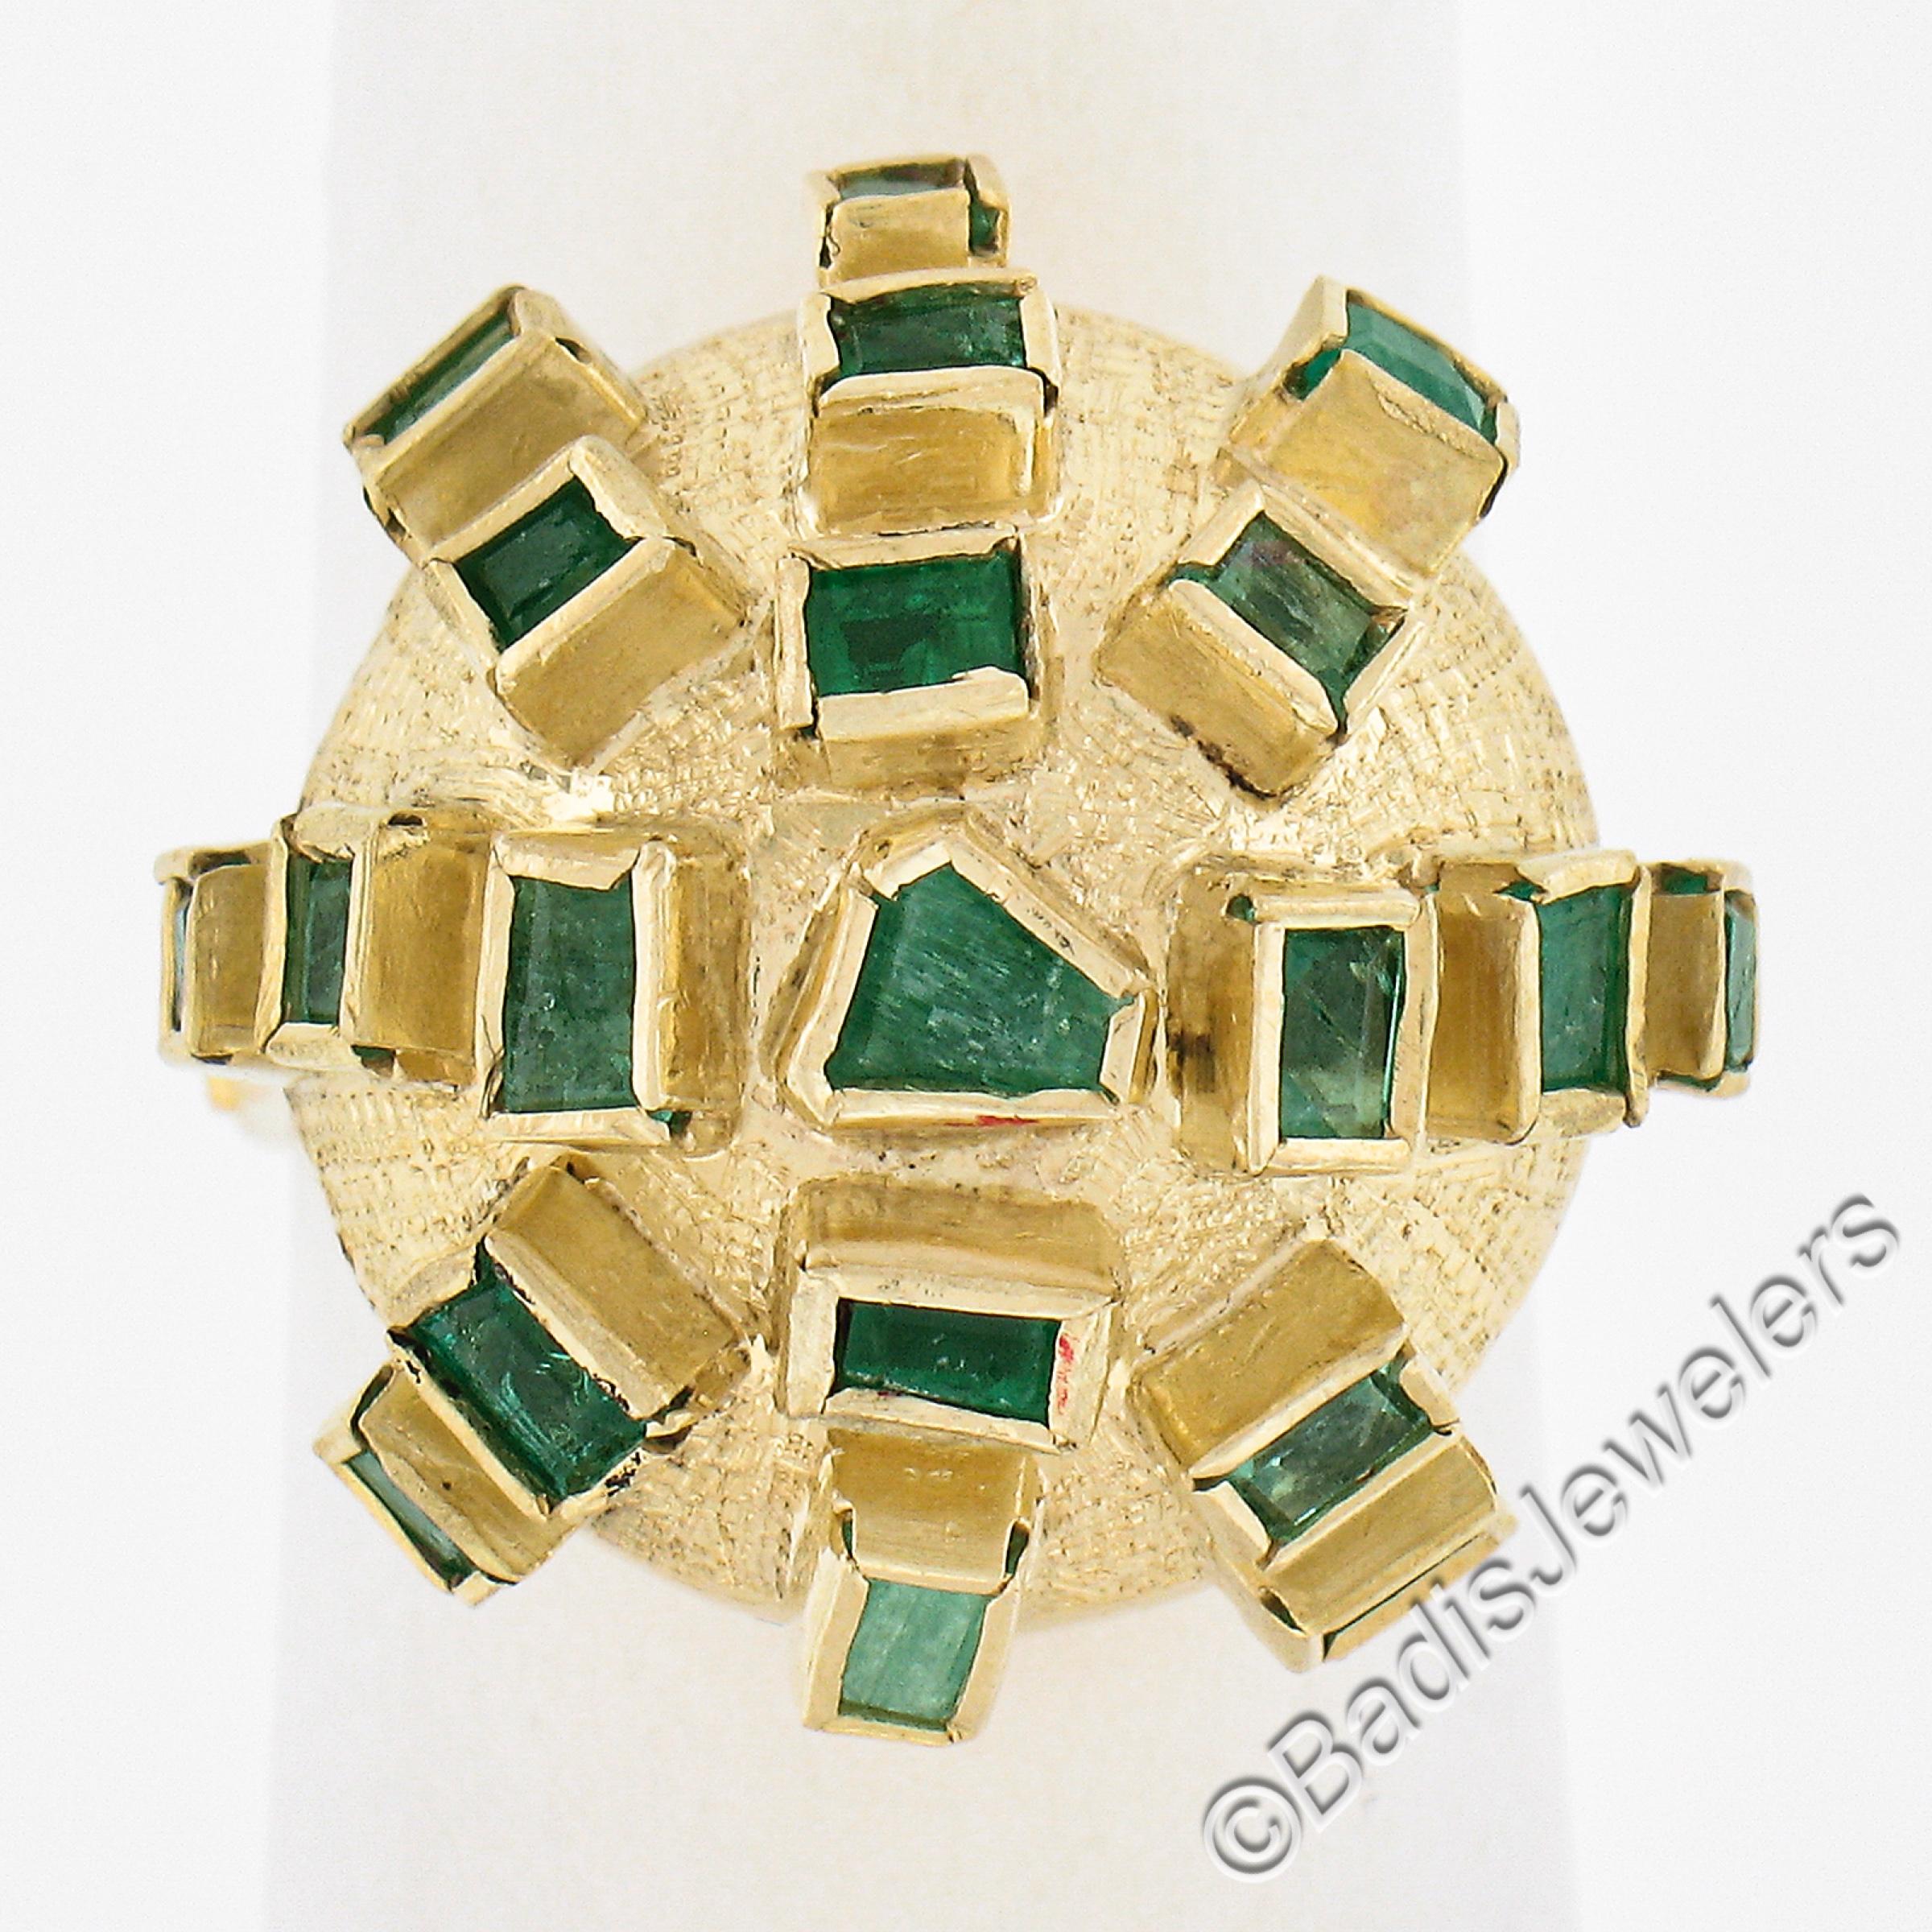 --Stone(s):--
(20) Natural Genuine Emeralds - Multi Shapes Cut - Bezel Set - Nice Green Color 

Material: Solid 18k Yellow Gold
Weight: 6.31 Grams
Ring Size: 6.0 (Fitted on a finger. We can custom size this ring. Please contact us prior to purchase